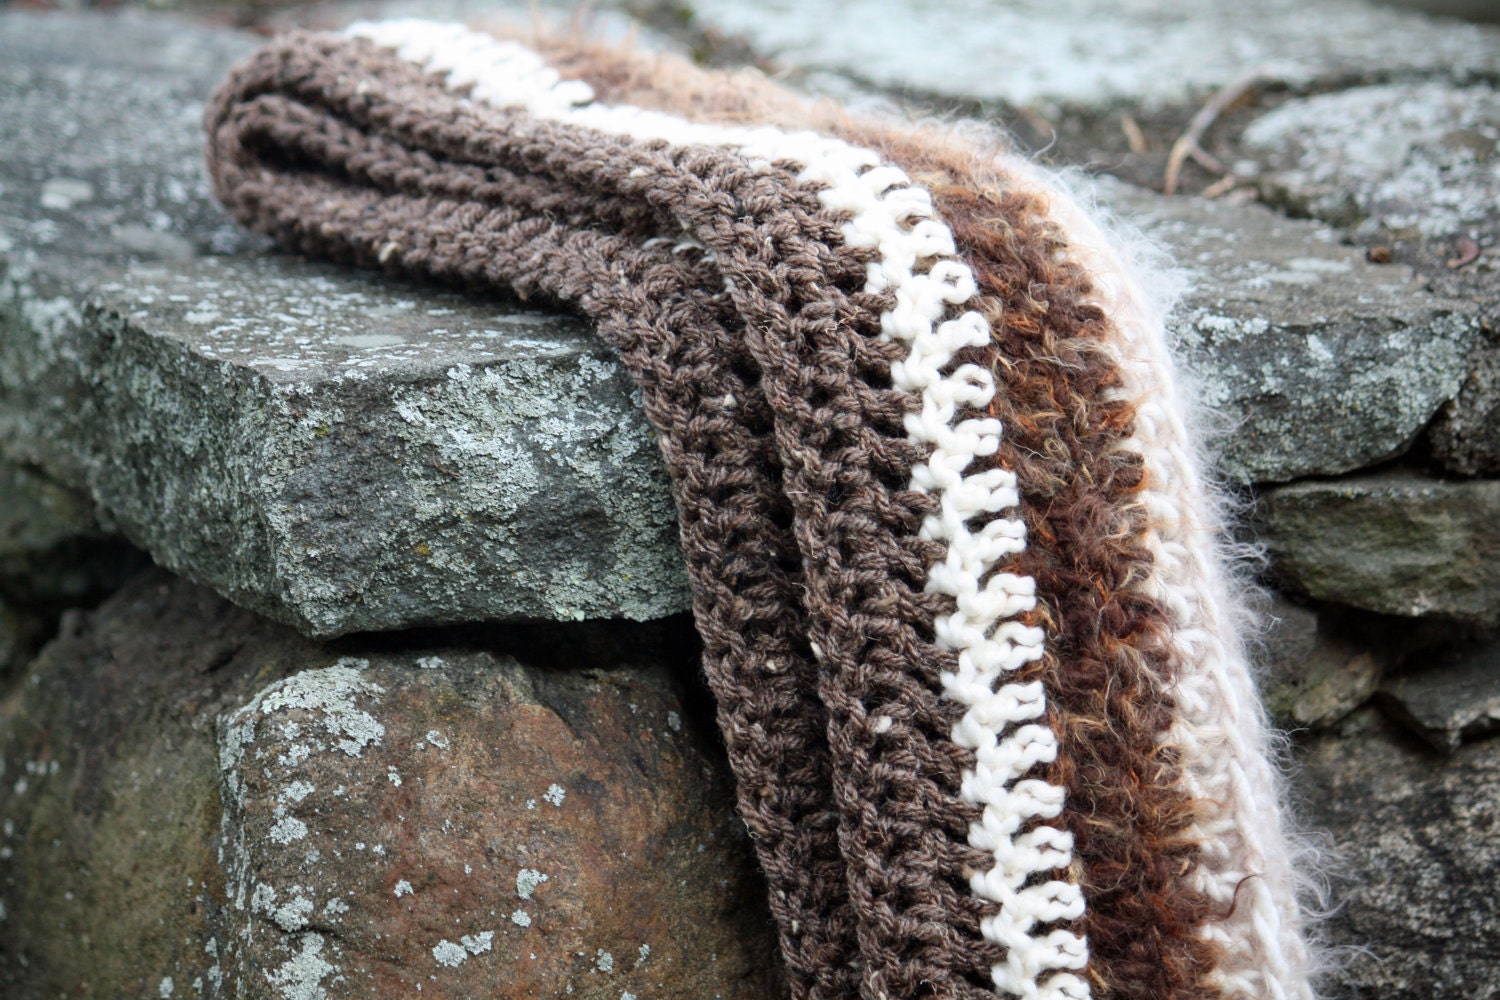 Free Shipping Etsy Black Friday Cyber Monday Extra Long Unisex Crochet Scarf - Neutral Stripes, Earth Tones, Holiday Gift for Him or Her